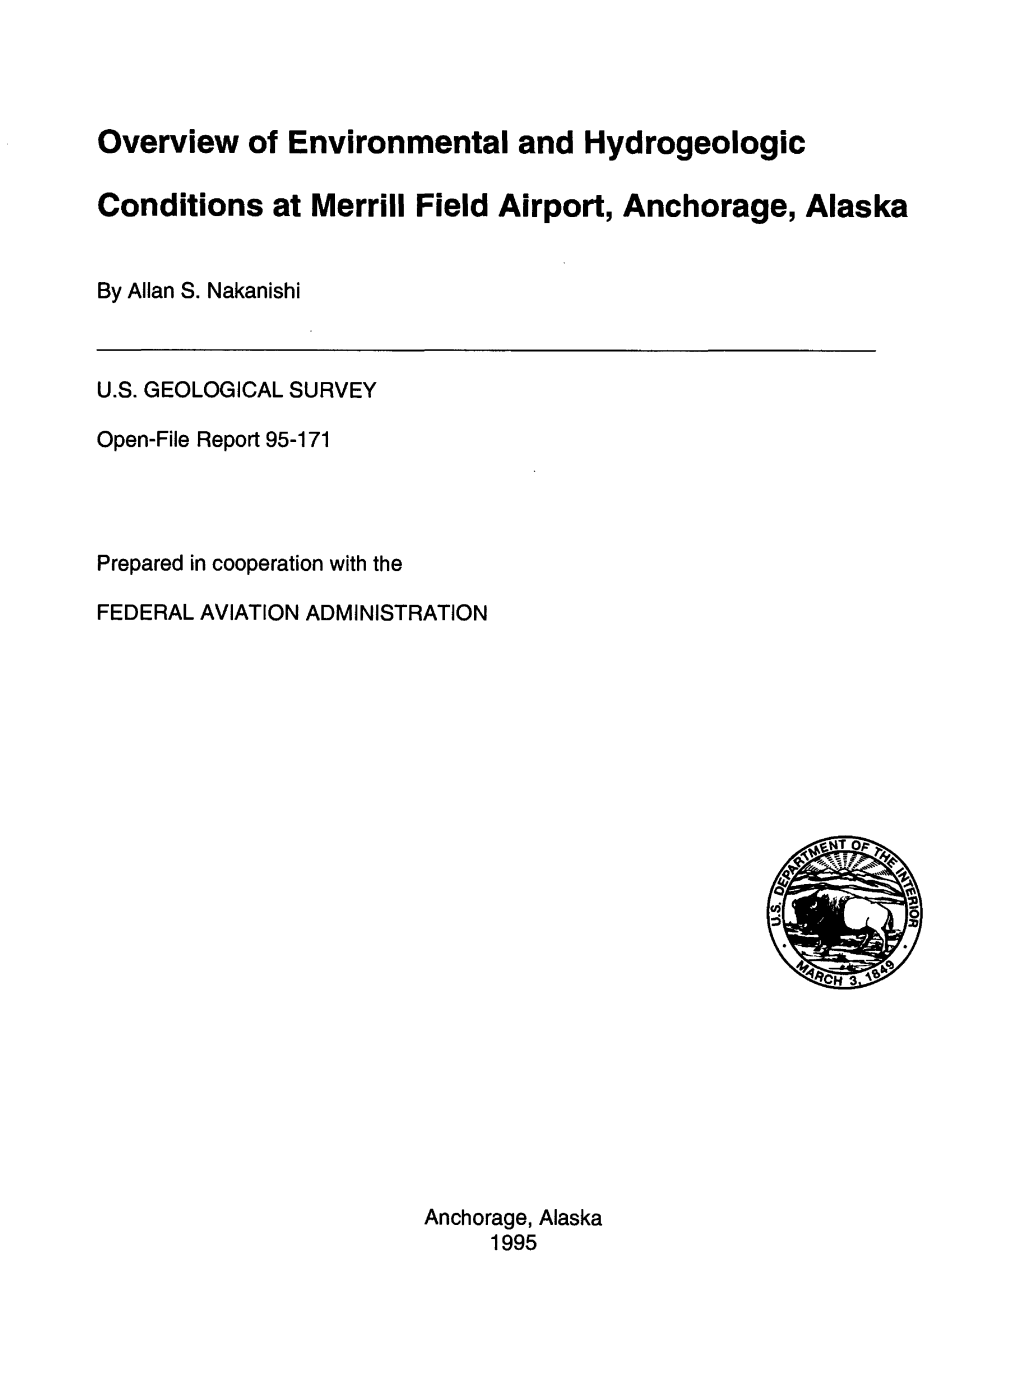 Overview of Environmental and Hydrogeologic Conditions at Merrill Field Airport, Anchorage, Alaska